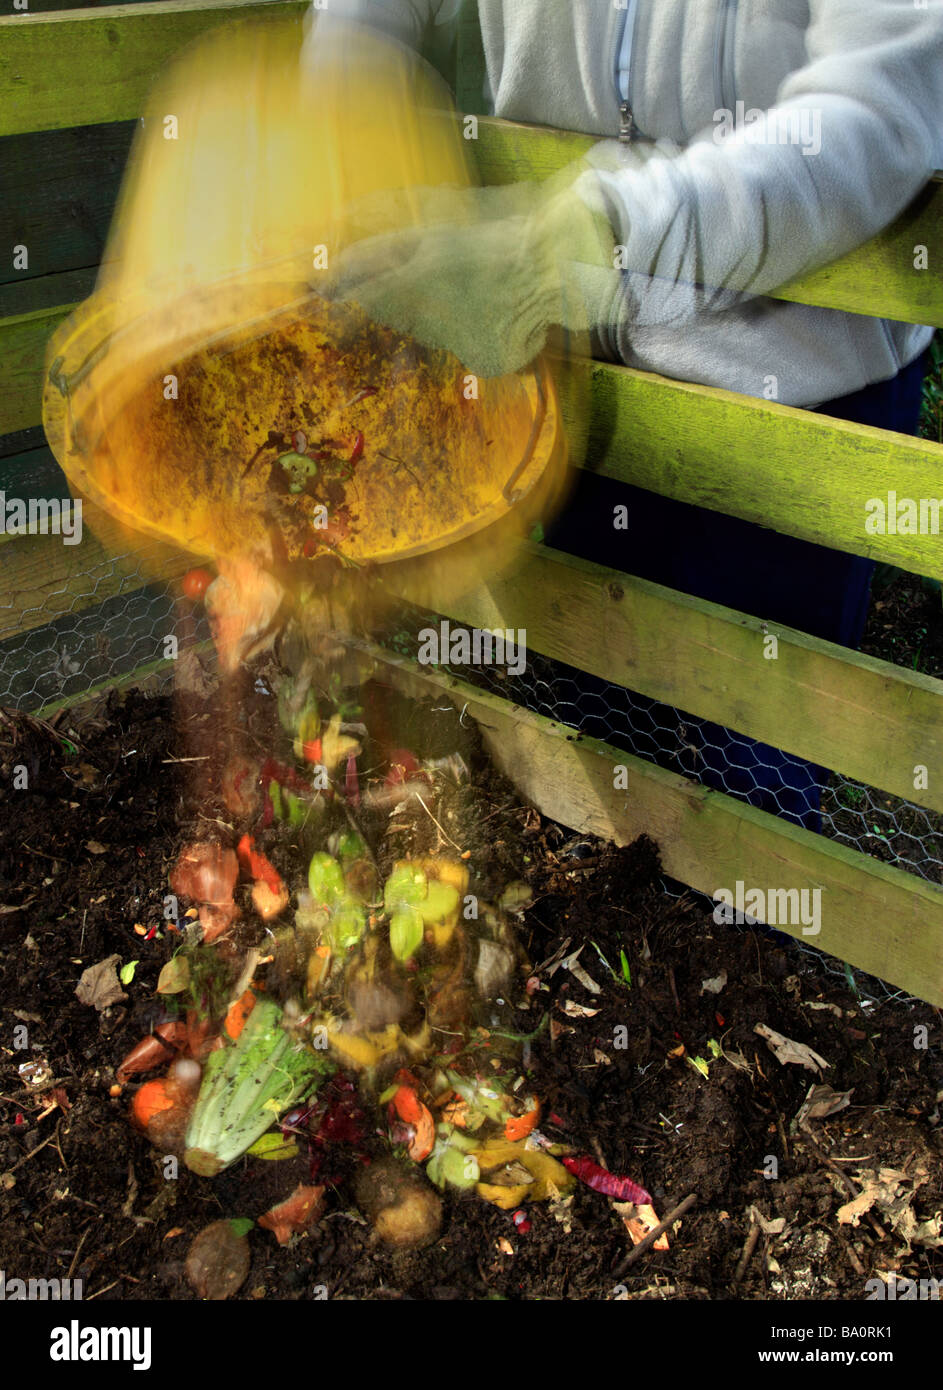 Bucket of kitchen waste being poured into a compost heap. Stock Photo